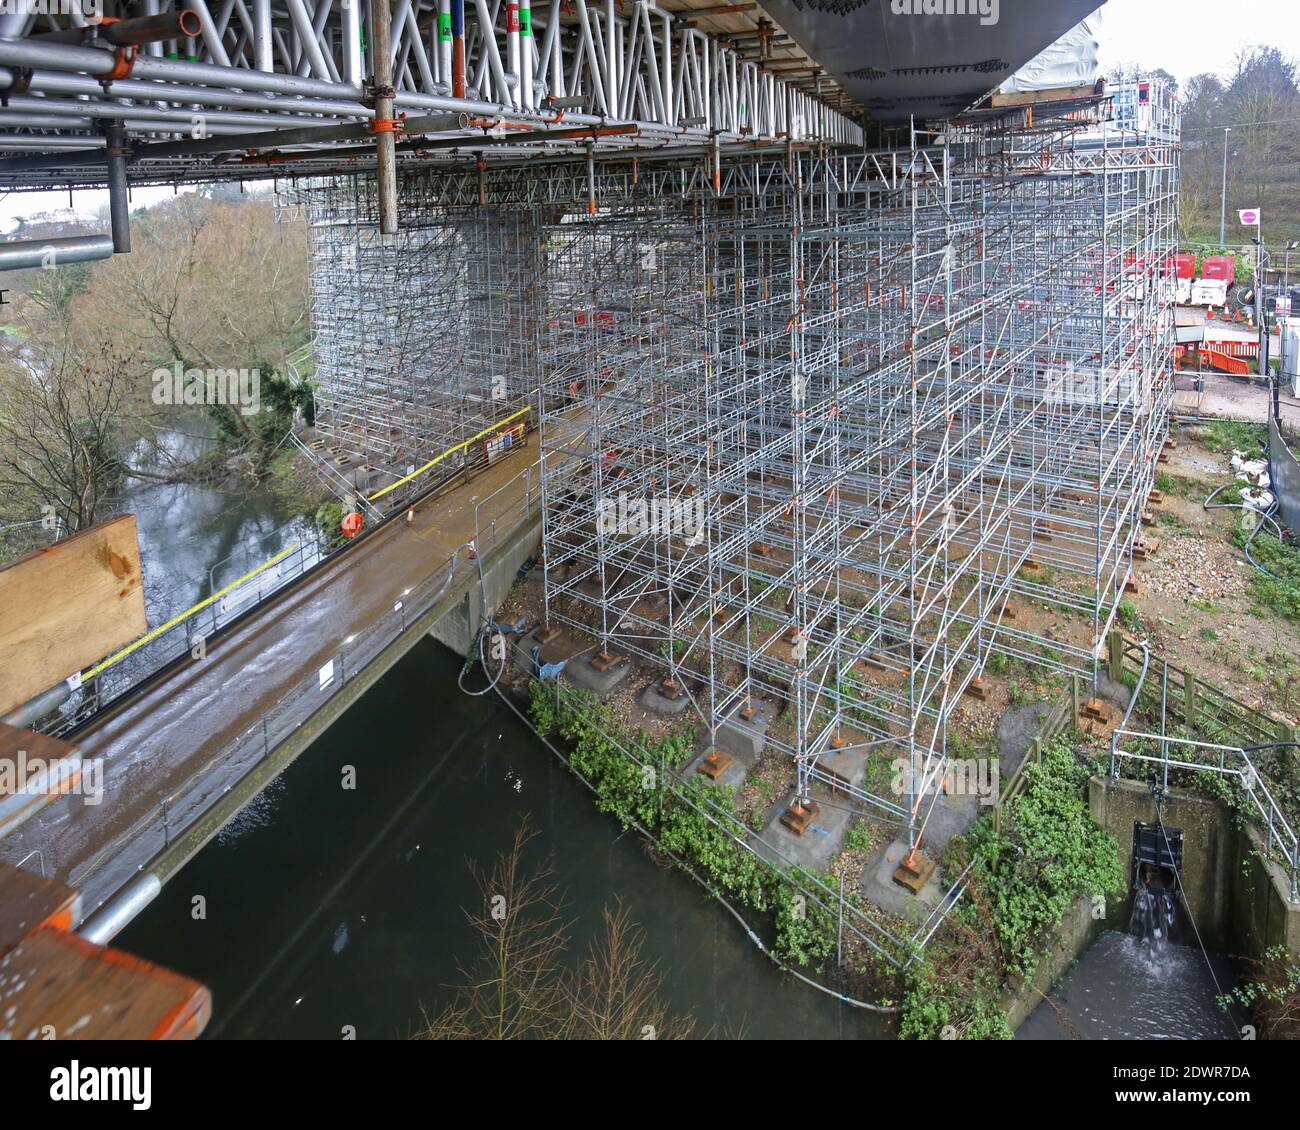 Scaffolding beneath the M25 motorway Gade Valley Viaduct, Kings Langley, UK. Providing access for strengthening work to the steel beams. Stock Photo